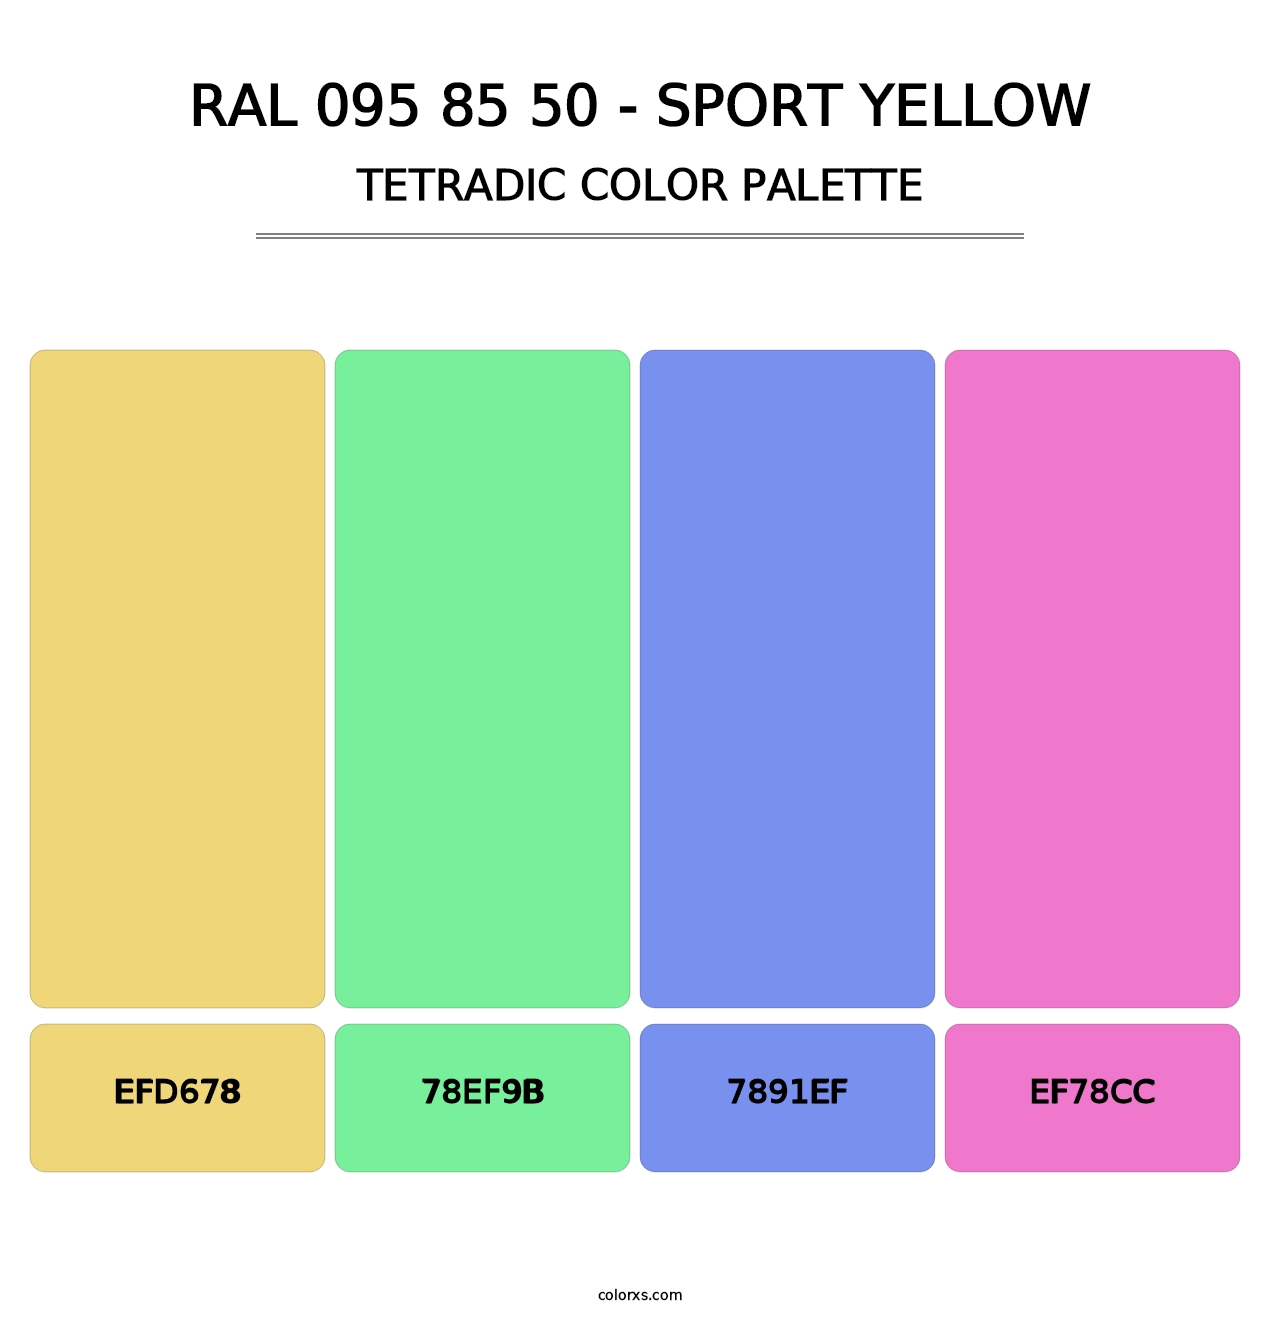 RAL 095 85 50 - Sport Yellow - Tetradic Color Palette